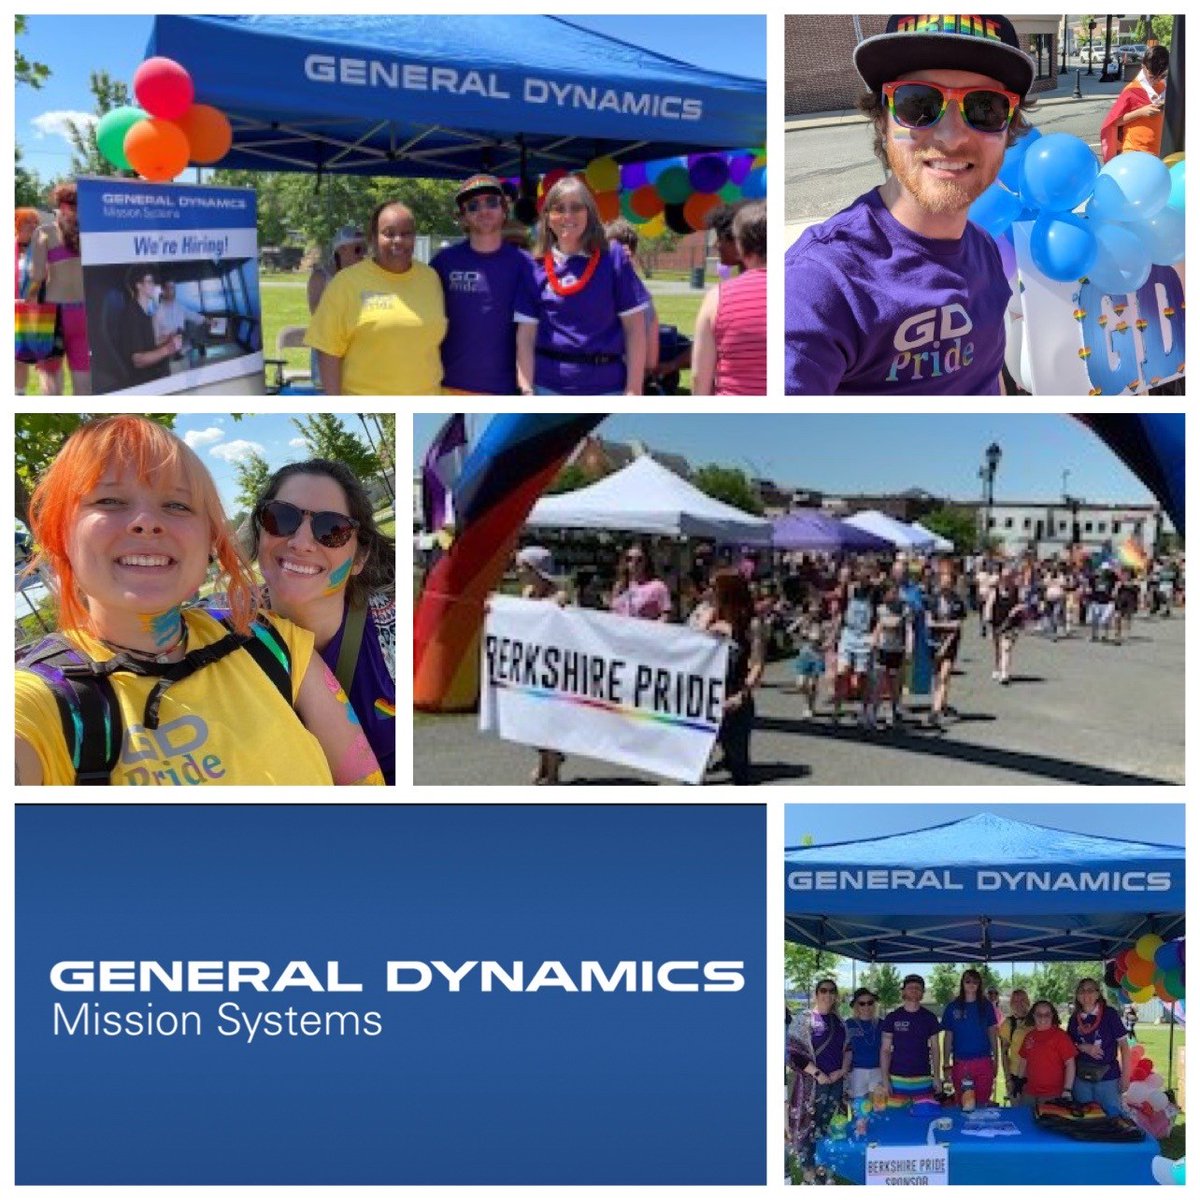 From our employees and friends the Berkshires (Massachusetts) - “It was a privilege to be a sponsor and participate in the Berkshire #Pride Parade!” said Josh B, #GDMissionSystems Systems Engineer. Thanks for representing! bit.ly/3OyxIKh